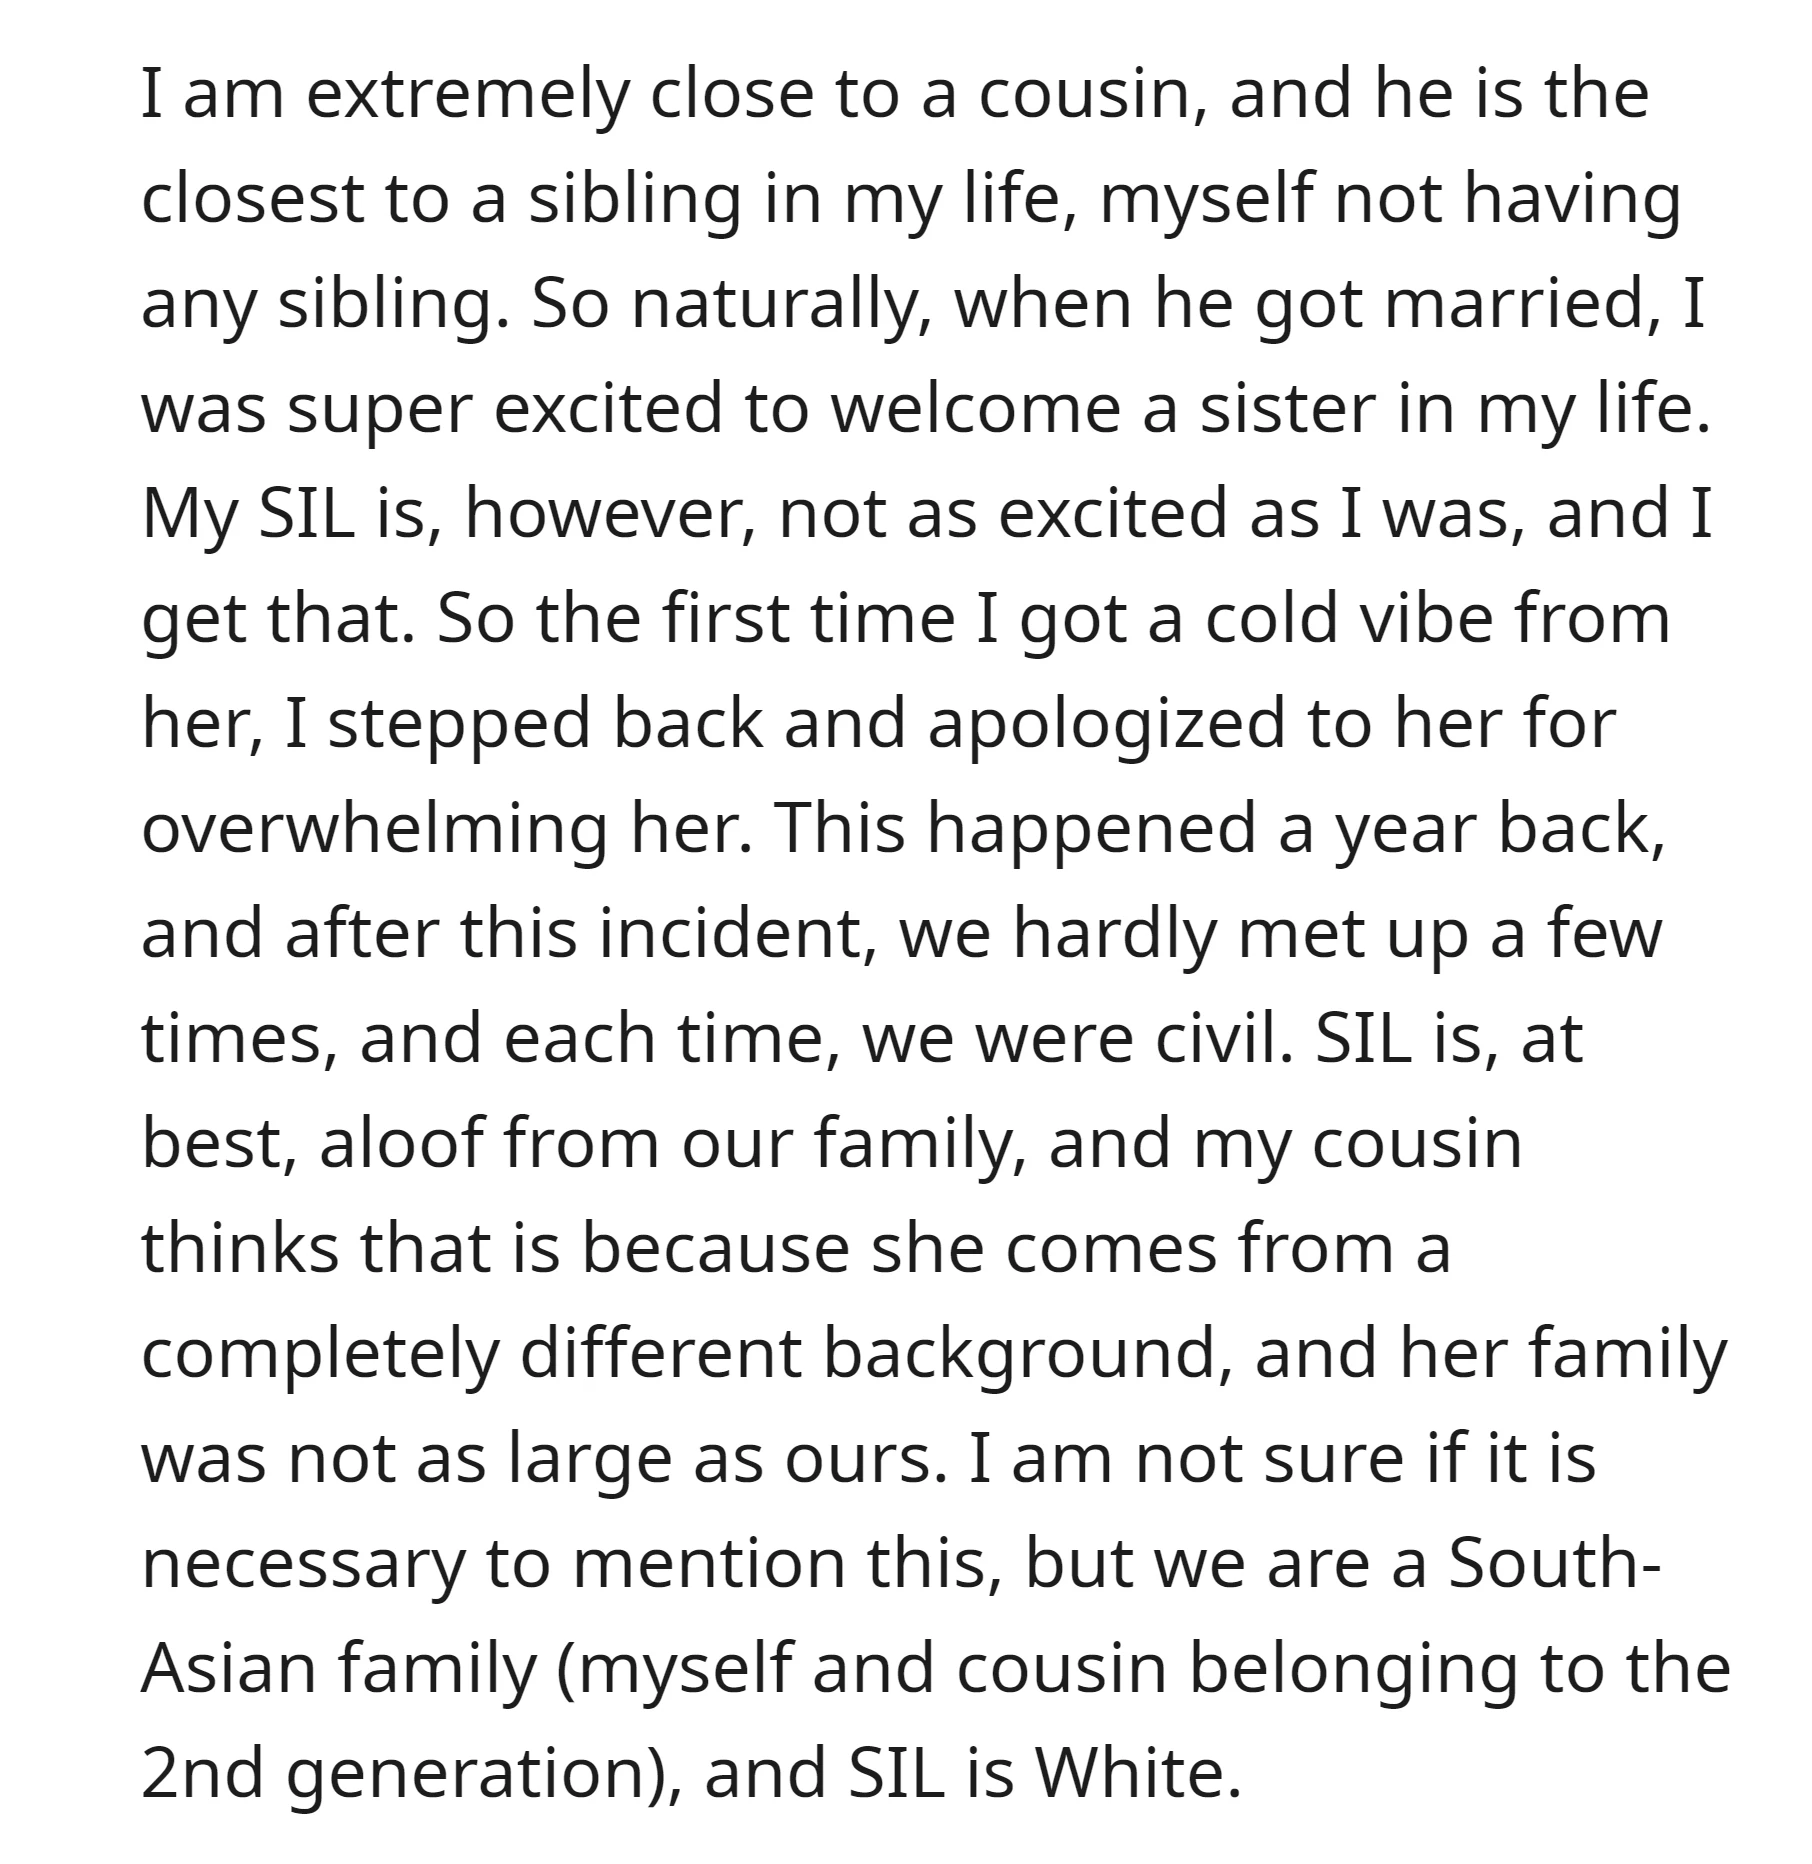 OP was excited about welcoming a sister-in-law into their life, but the SIL wasn't